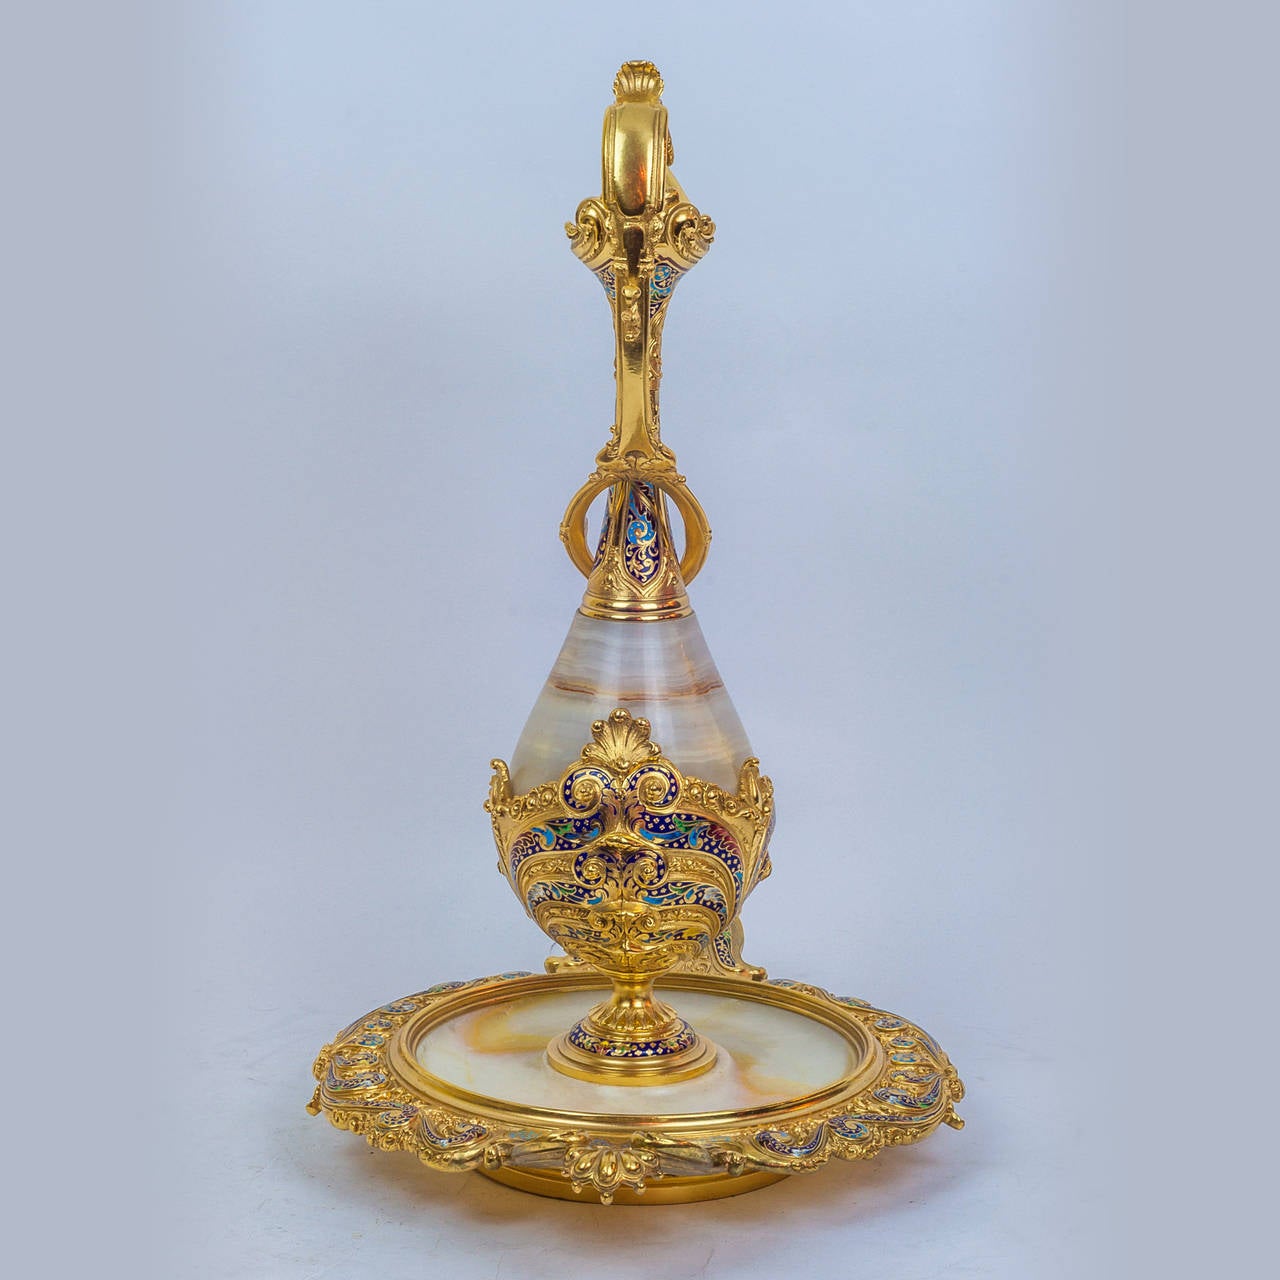 A fantastic gilt bronze and onyx and champleve enamel pitcher and basin.
Stock number: DA51.